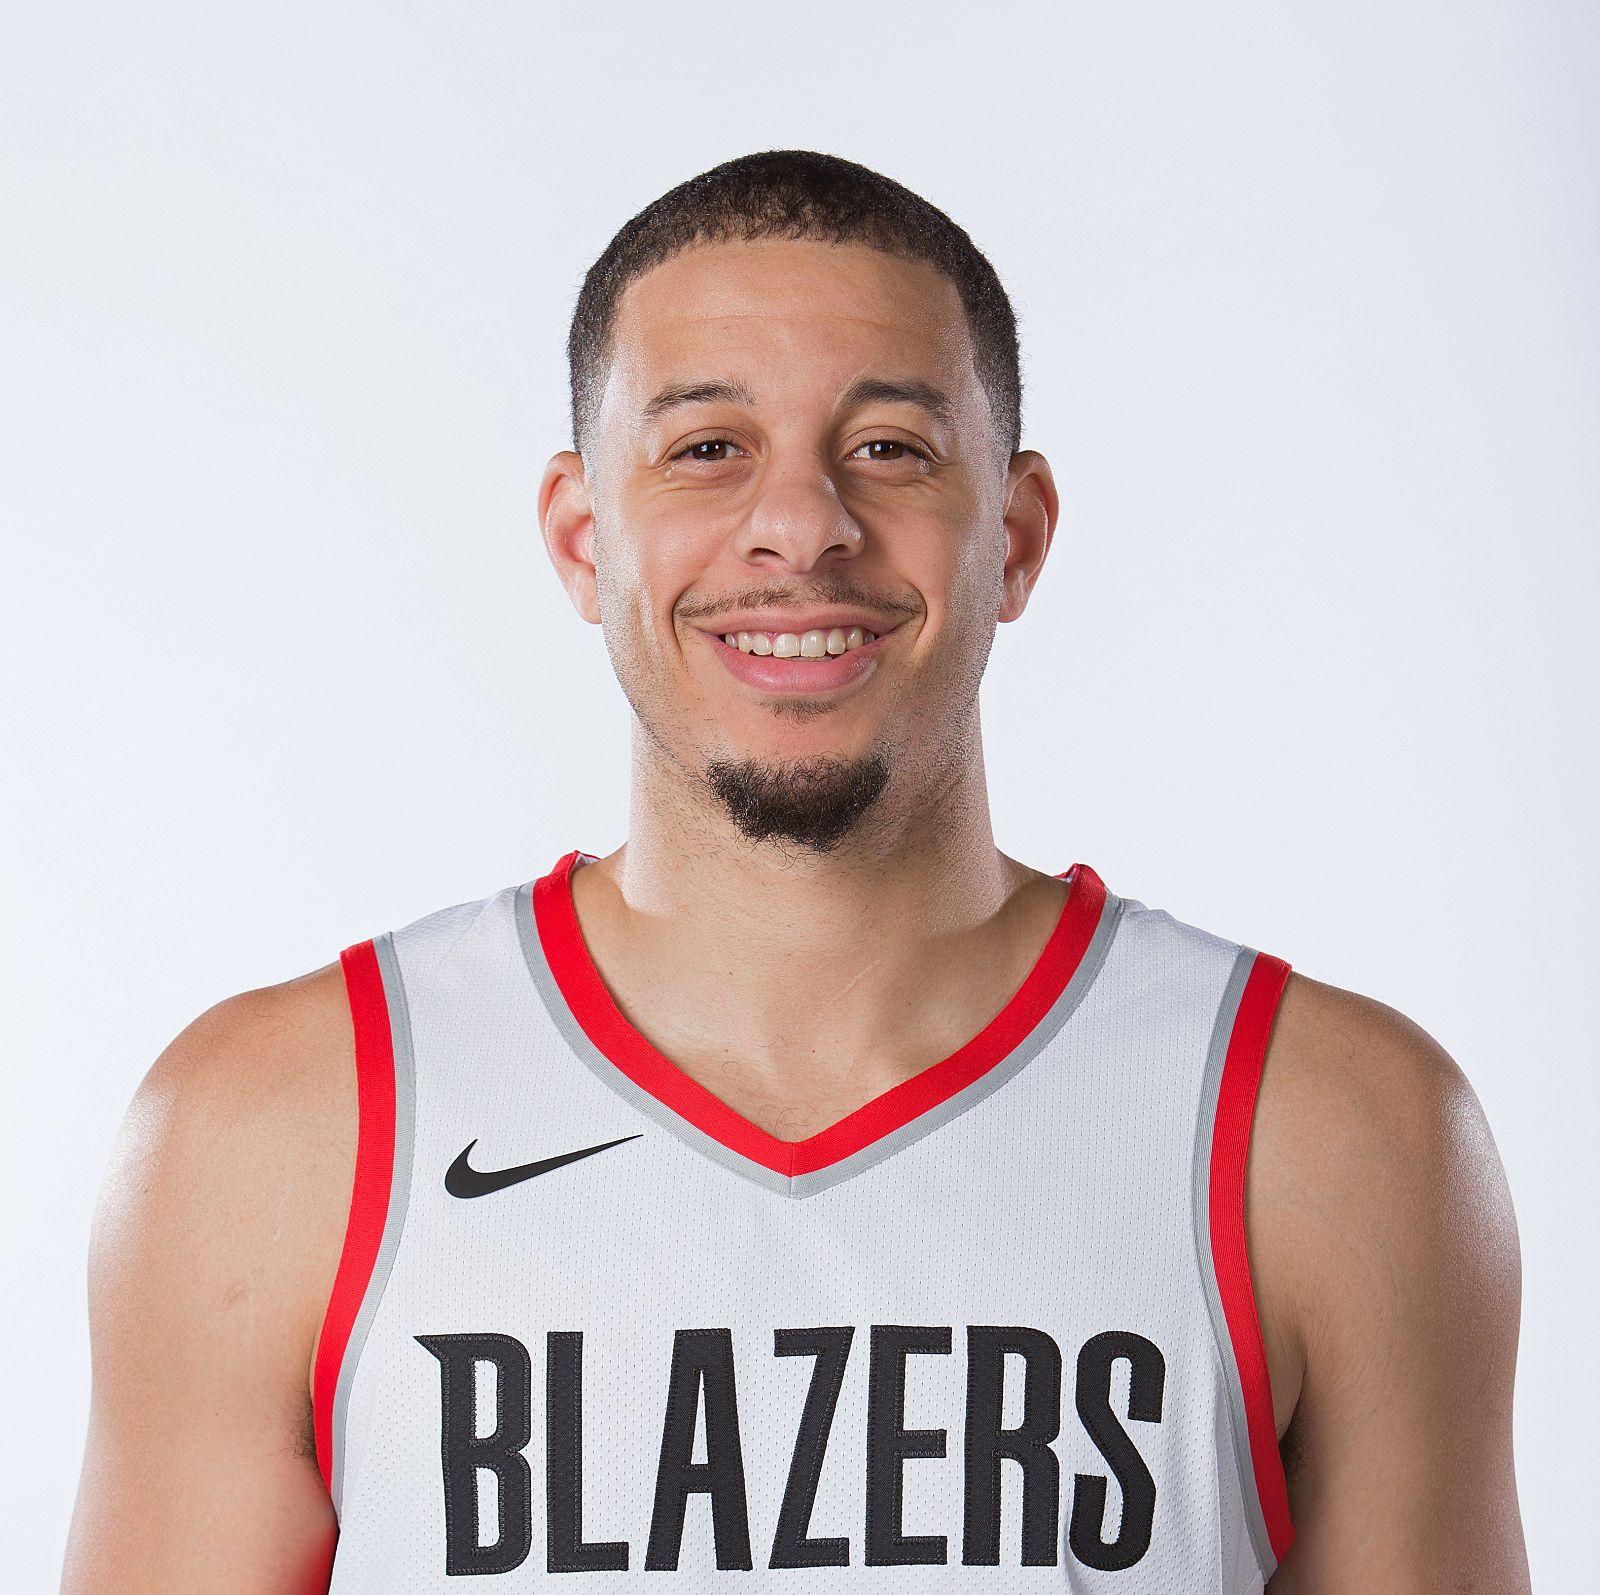 Blazers: 5 goals for Seth Curry in his first season back from injury